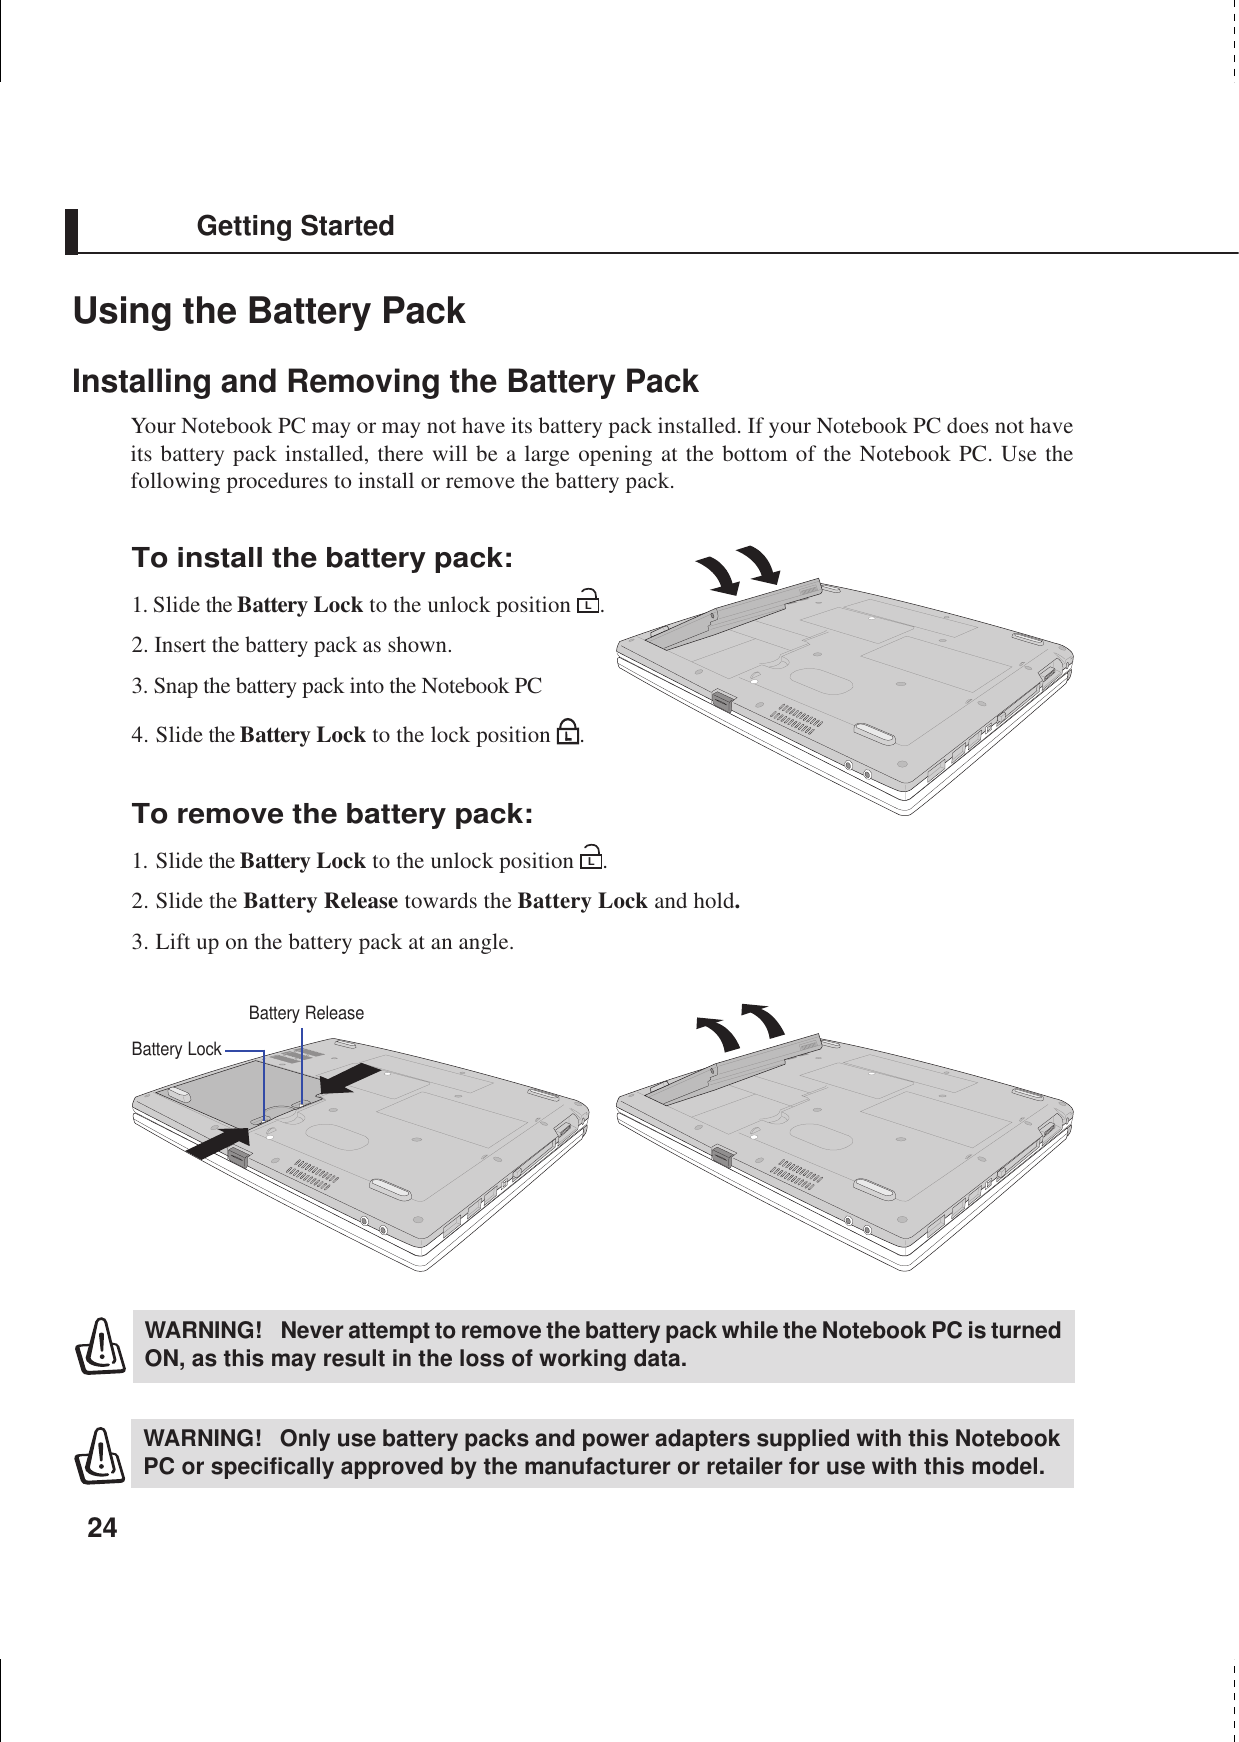 24Getting StartedUsing the Battery PackInstalling and Removing the Battery PackYour Notebook PC may or may not have its battery pack installed. If your Notebook PC does not haveits battery pack installed, there will be a large opening at the bottom of the Notebook PC. Use thefollowing procedures to install or remove the battery pack.WARNING! Only use battery packs and power adapters supplied with this NotebookPC or specifically approved by the manufacturer or retailer for use with this model.WARNING! Never attempt to remove the battery pack while the Notebook PC is turnedON, as this may result in the loss of working data.Battery ReleaseBattery LockTo install the battery pack:1. Slide the Battery Lock to the unlock position L.2. Insert the battery pack as shown.3. Snap the battery pack into the Notebook PC4. Slide the Battery Lock to the lock position  .To remove the battery pack:1. Slide the Battery Lock to the unlock position L.2. Slide the Battery Release towards the Battery Lock and hold.3. Lift up on the battery pack at an angle.